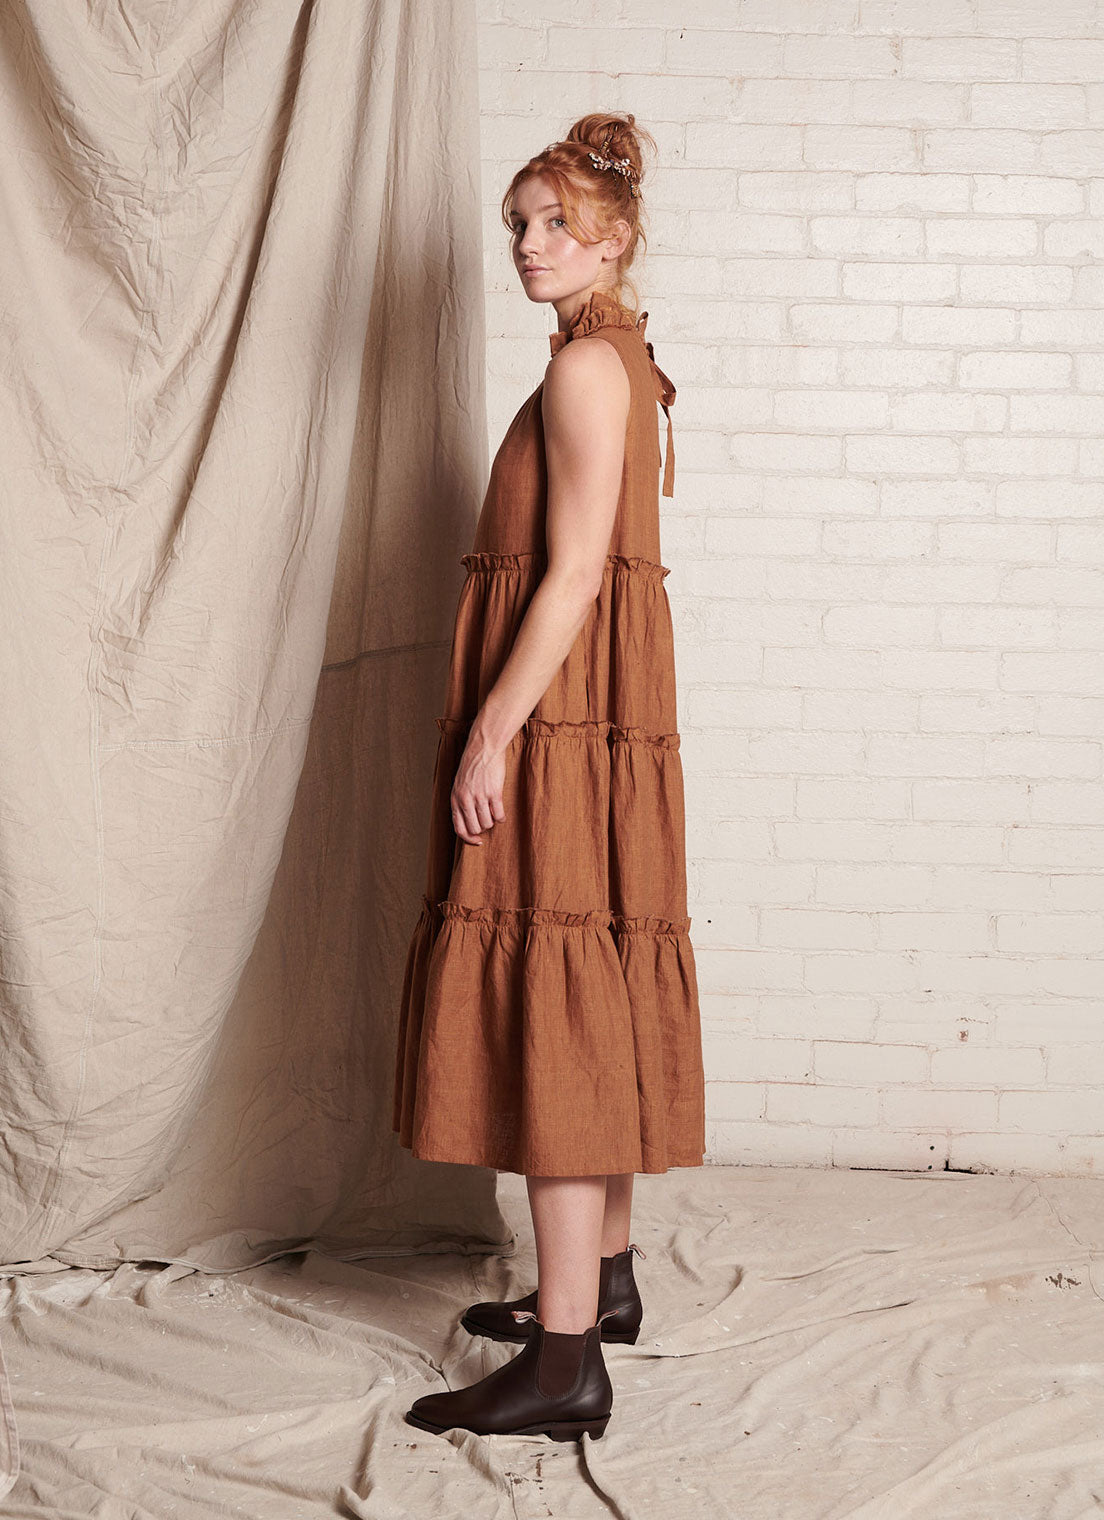 A bronze, sleeveless, pure European linen, tiered dress with ruffled collar and detailing